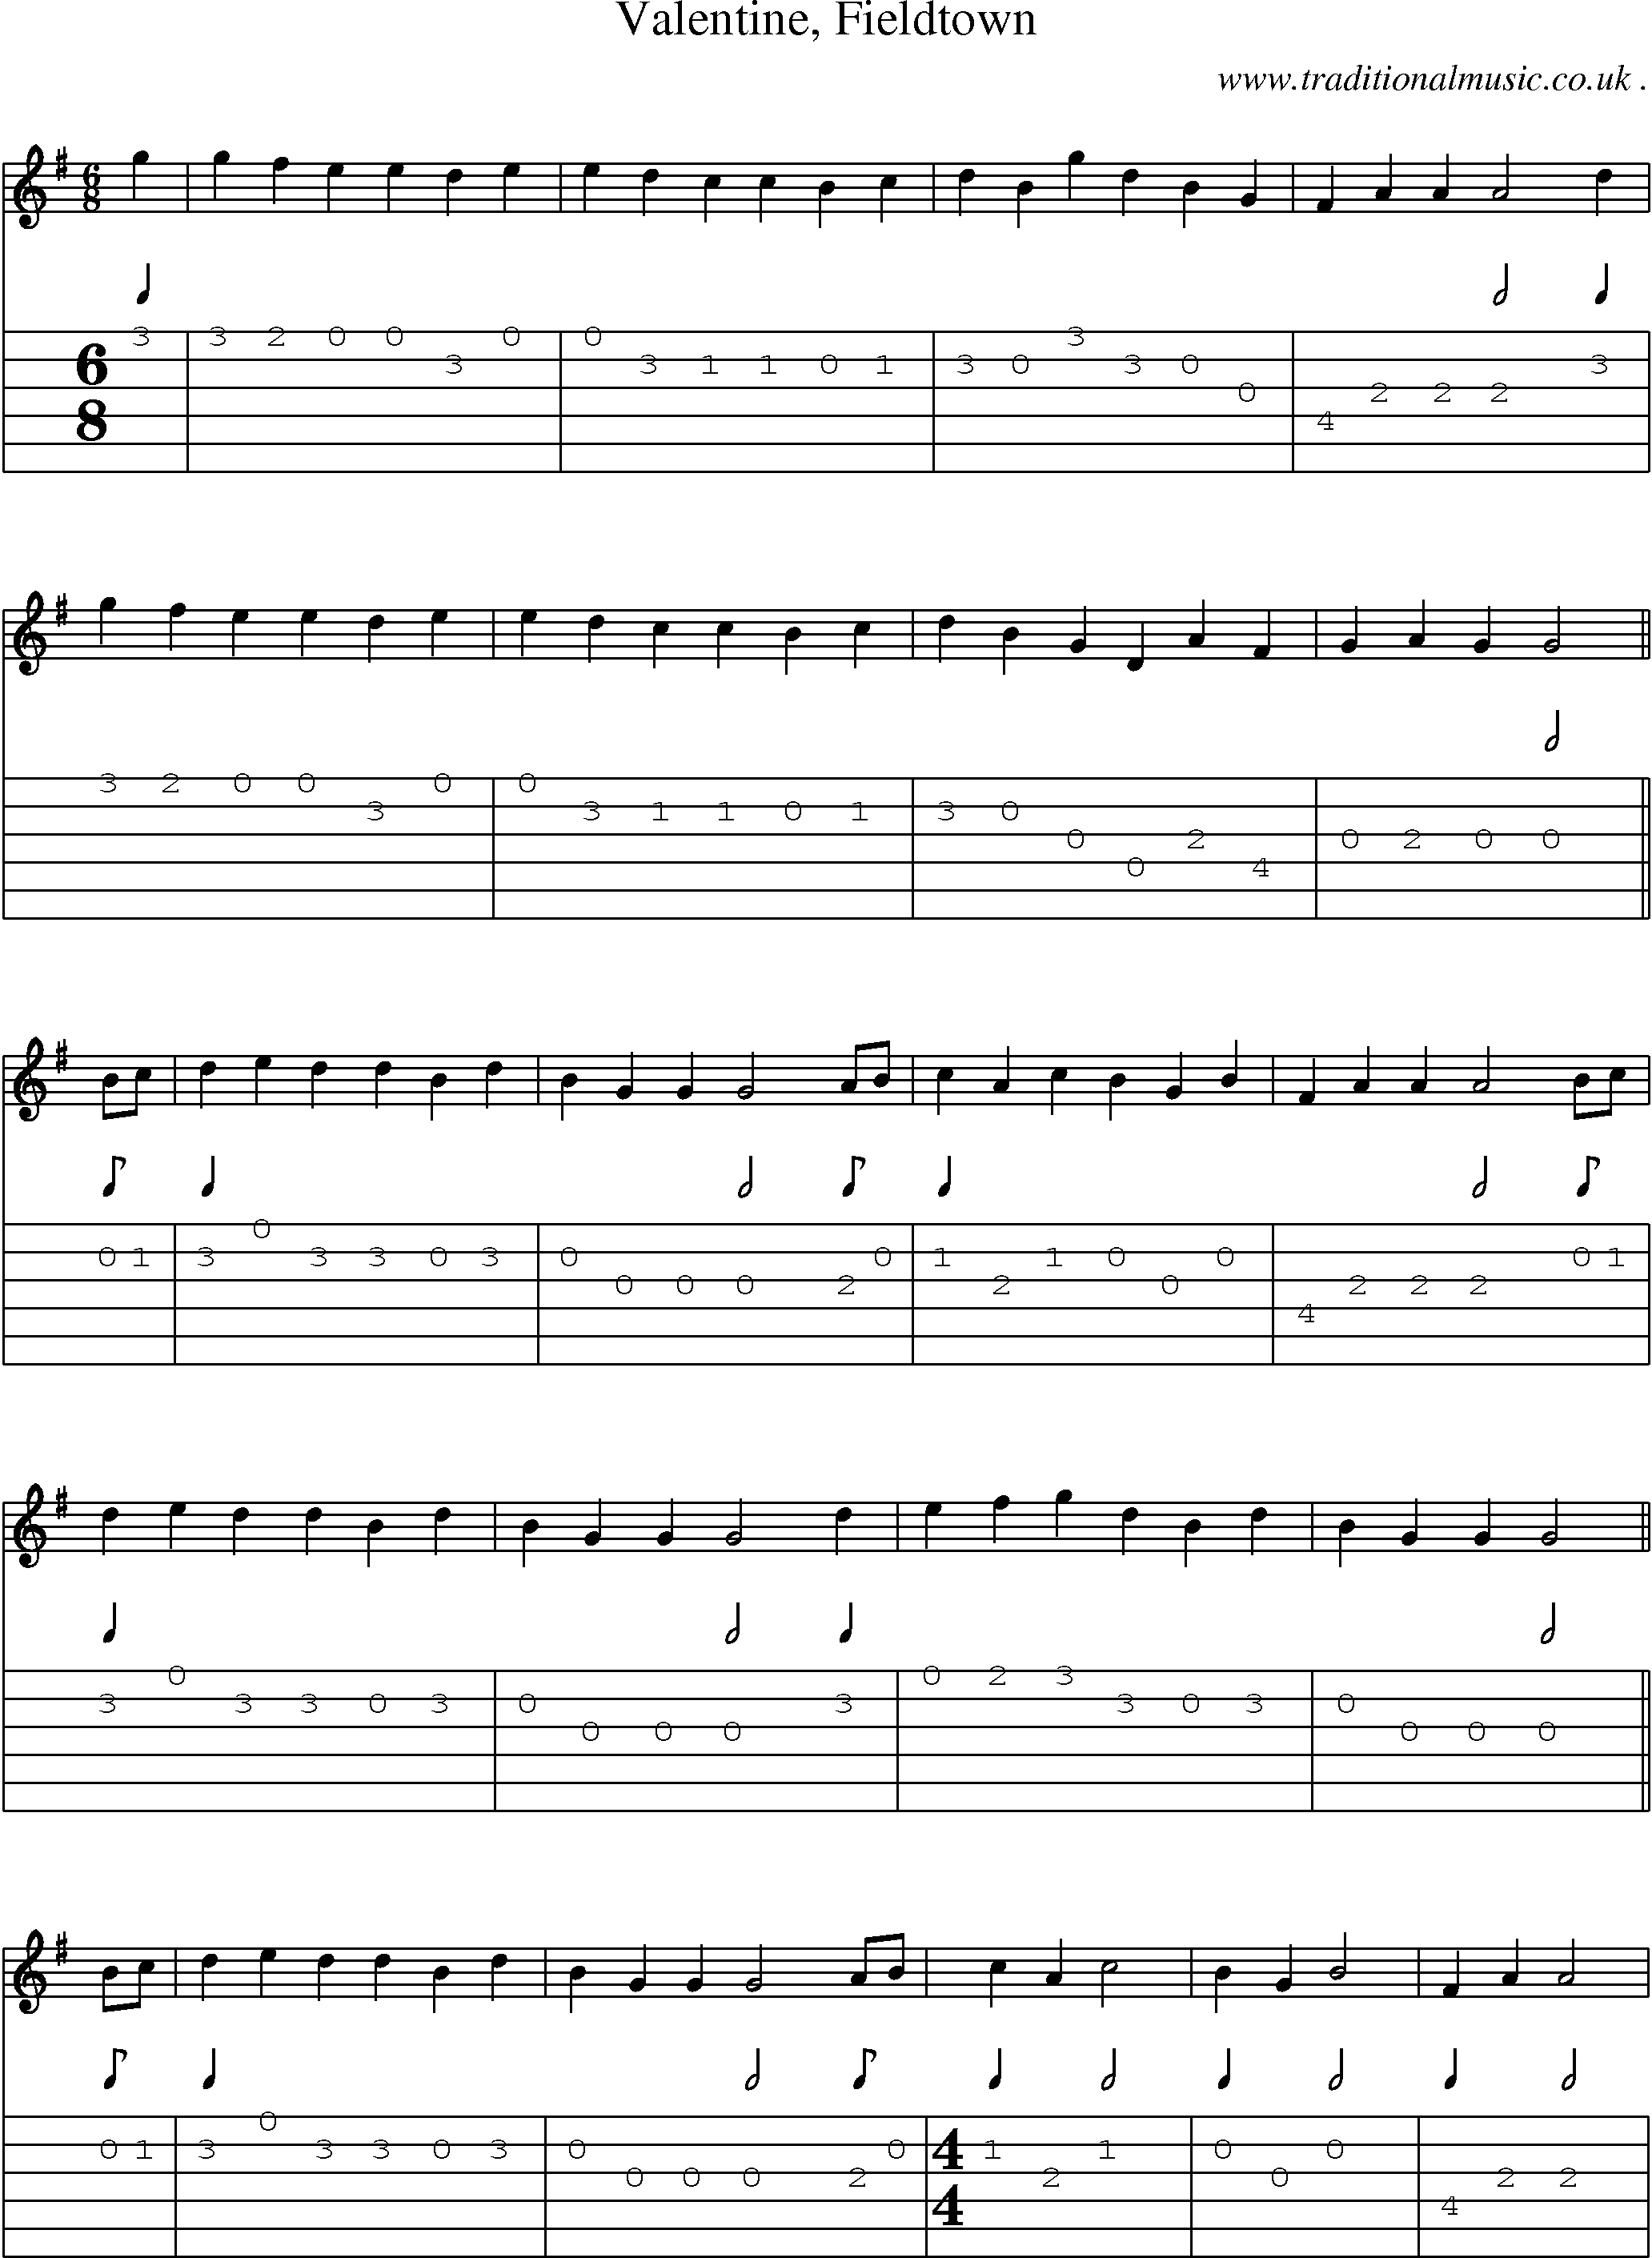 Sheet-Music and Guitar Tabs for Valentine Fieldtown